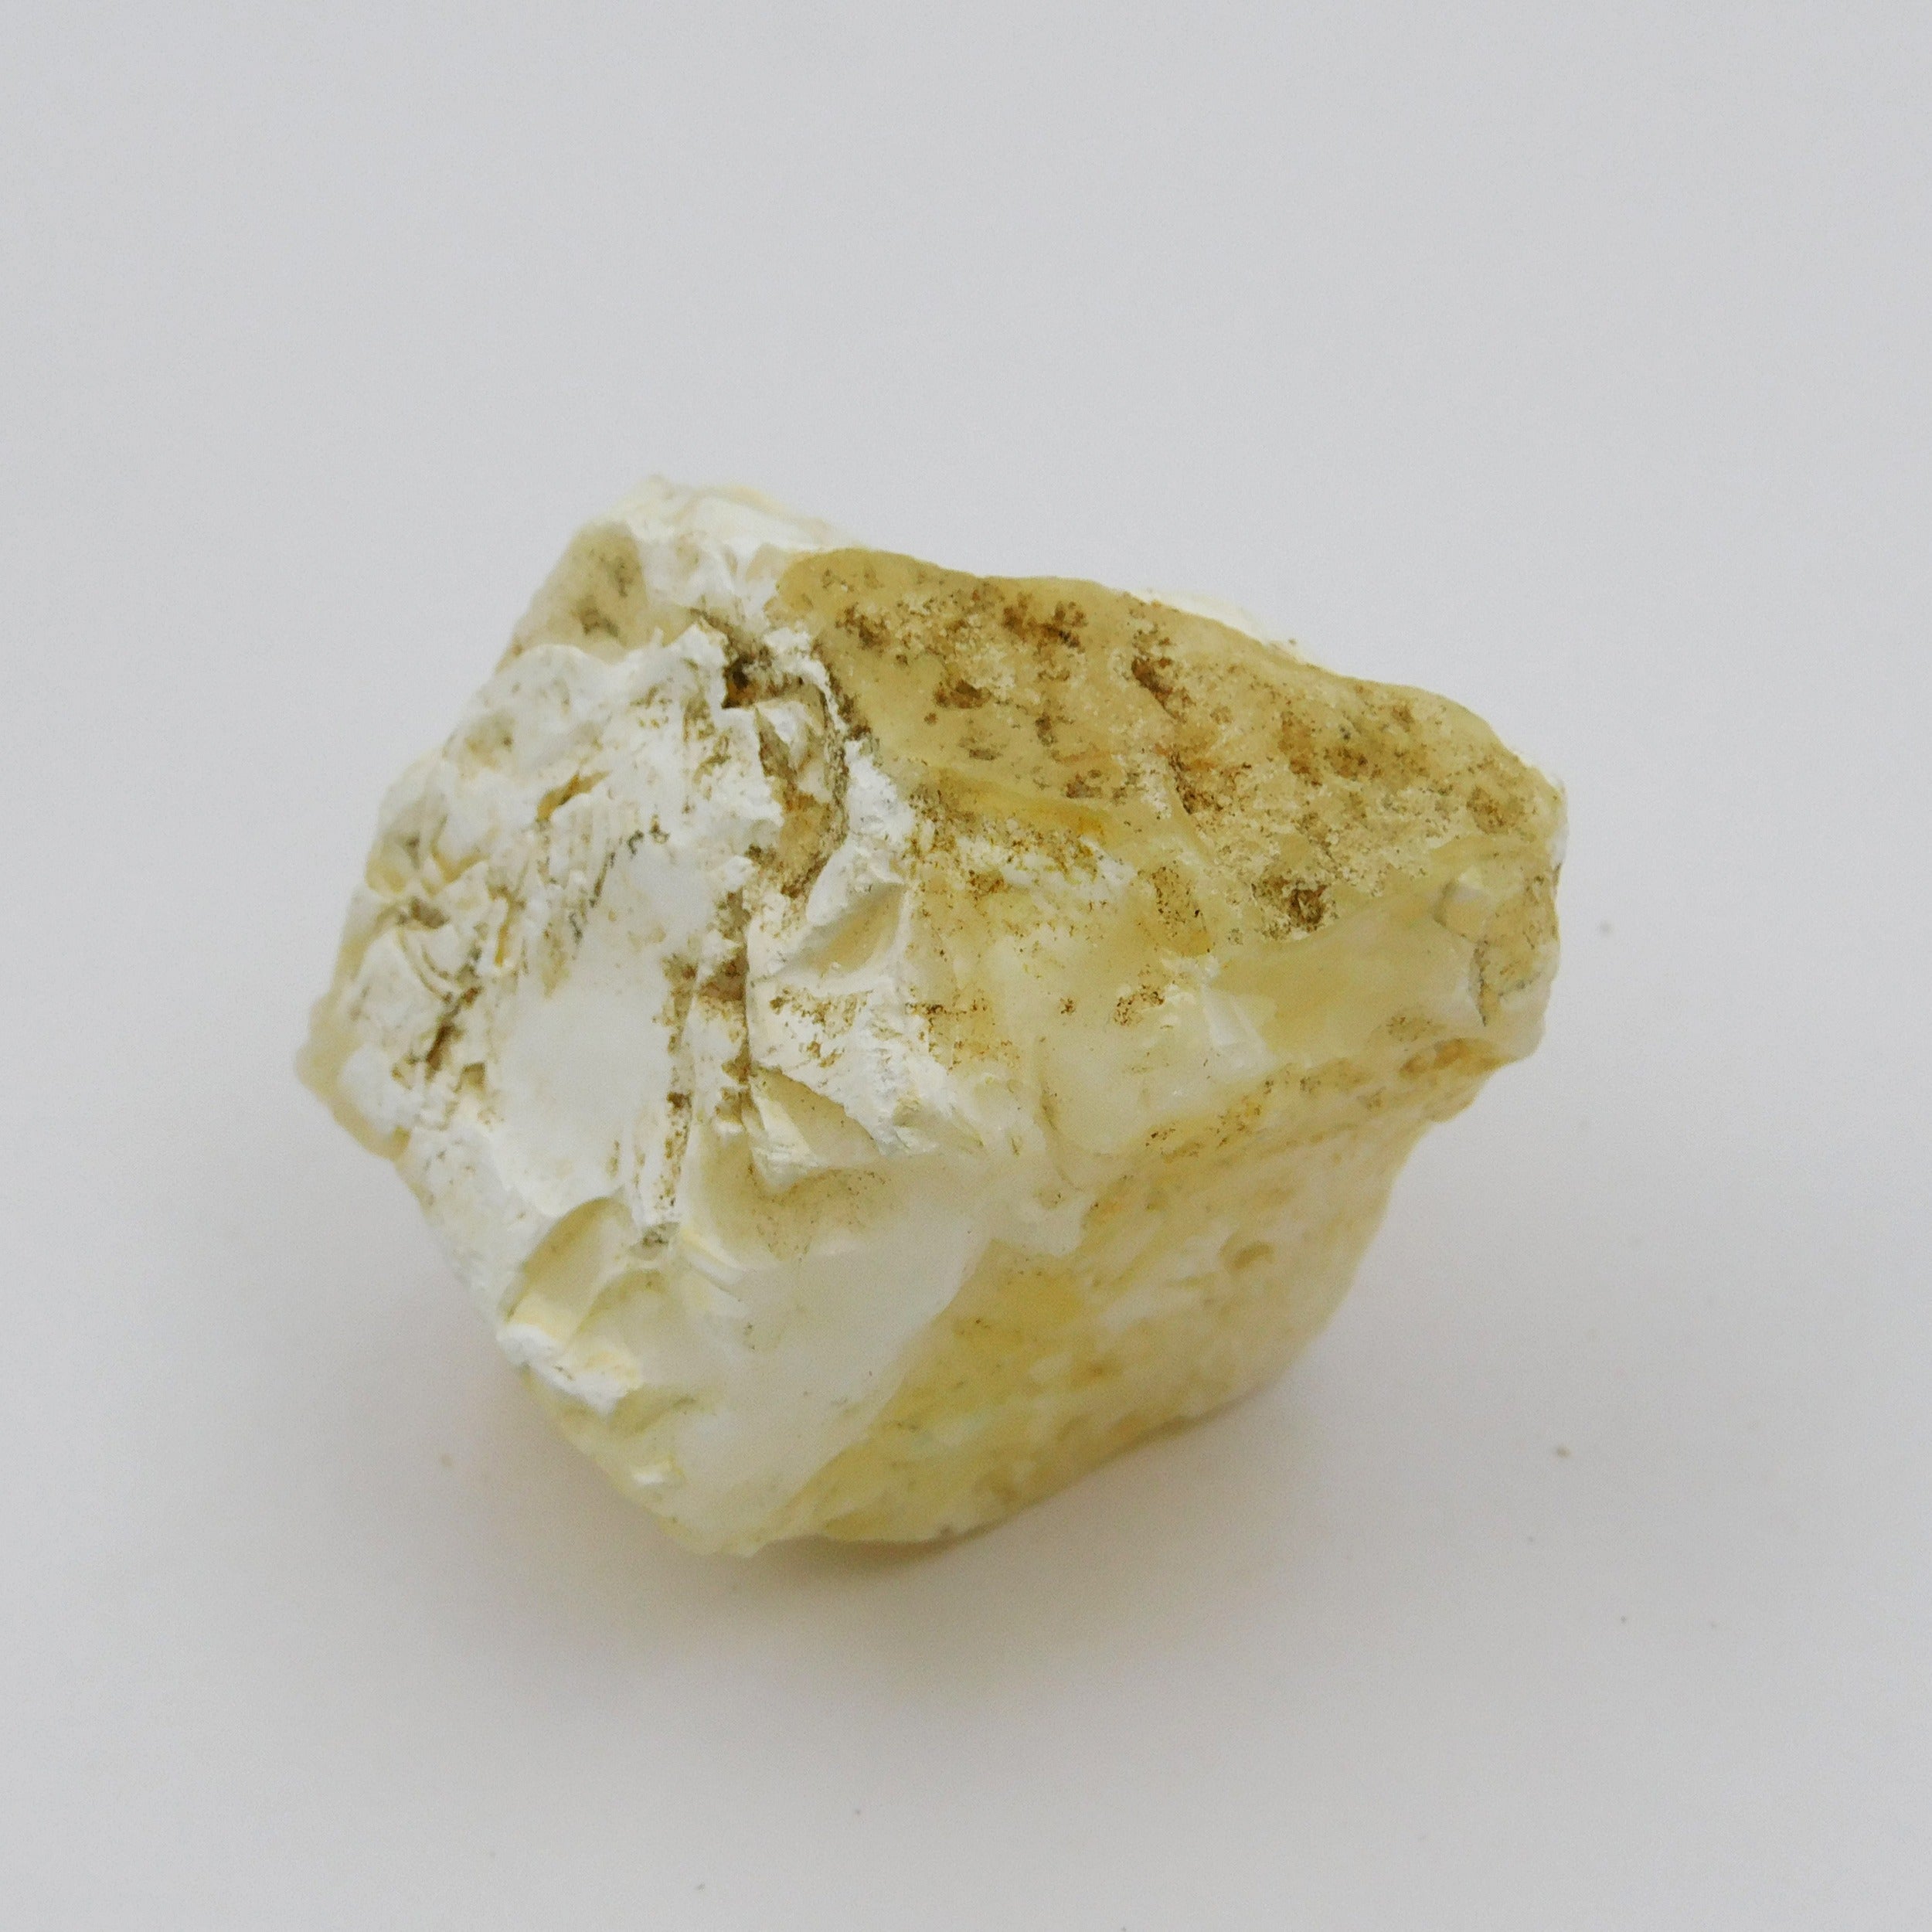 Huge Size Natural White Color Opal Rough 273.60 Carat Certified 100% Loose Gemstone Rough | Free Delivery Free Gift | Opal Rough Gemstone - Free Delivery Free Gift